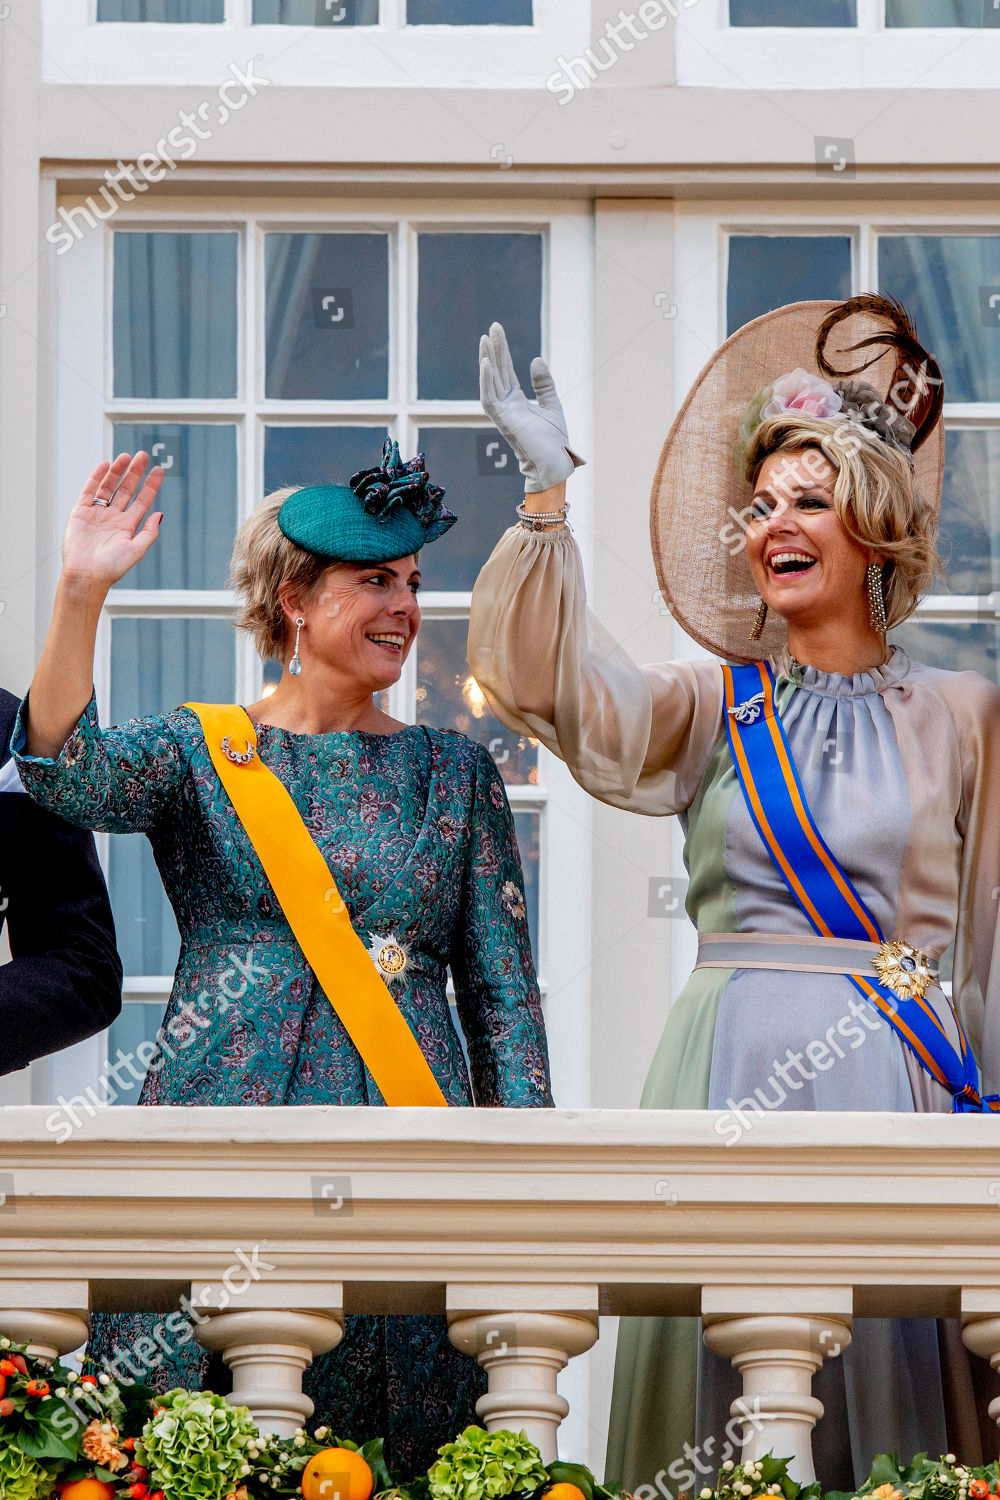 opening-of-the-parliamentary-season-the-hague-the-netherlands-shutterstock-editorial-9885898n.jpg